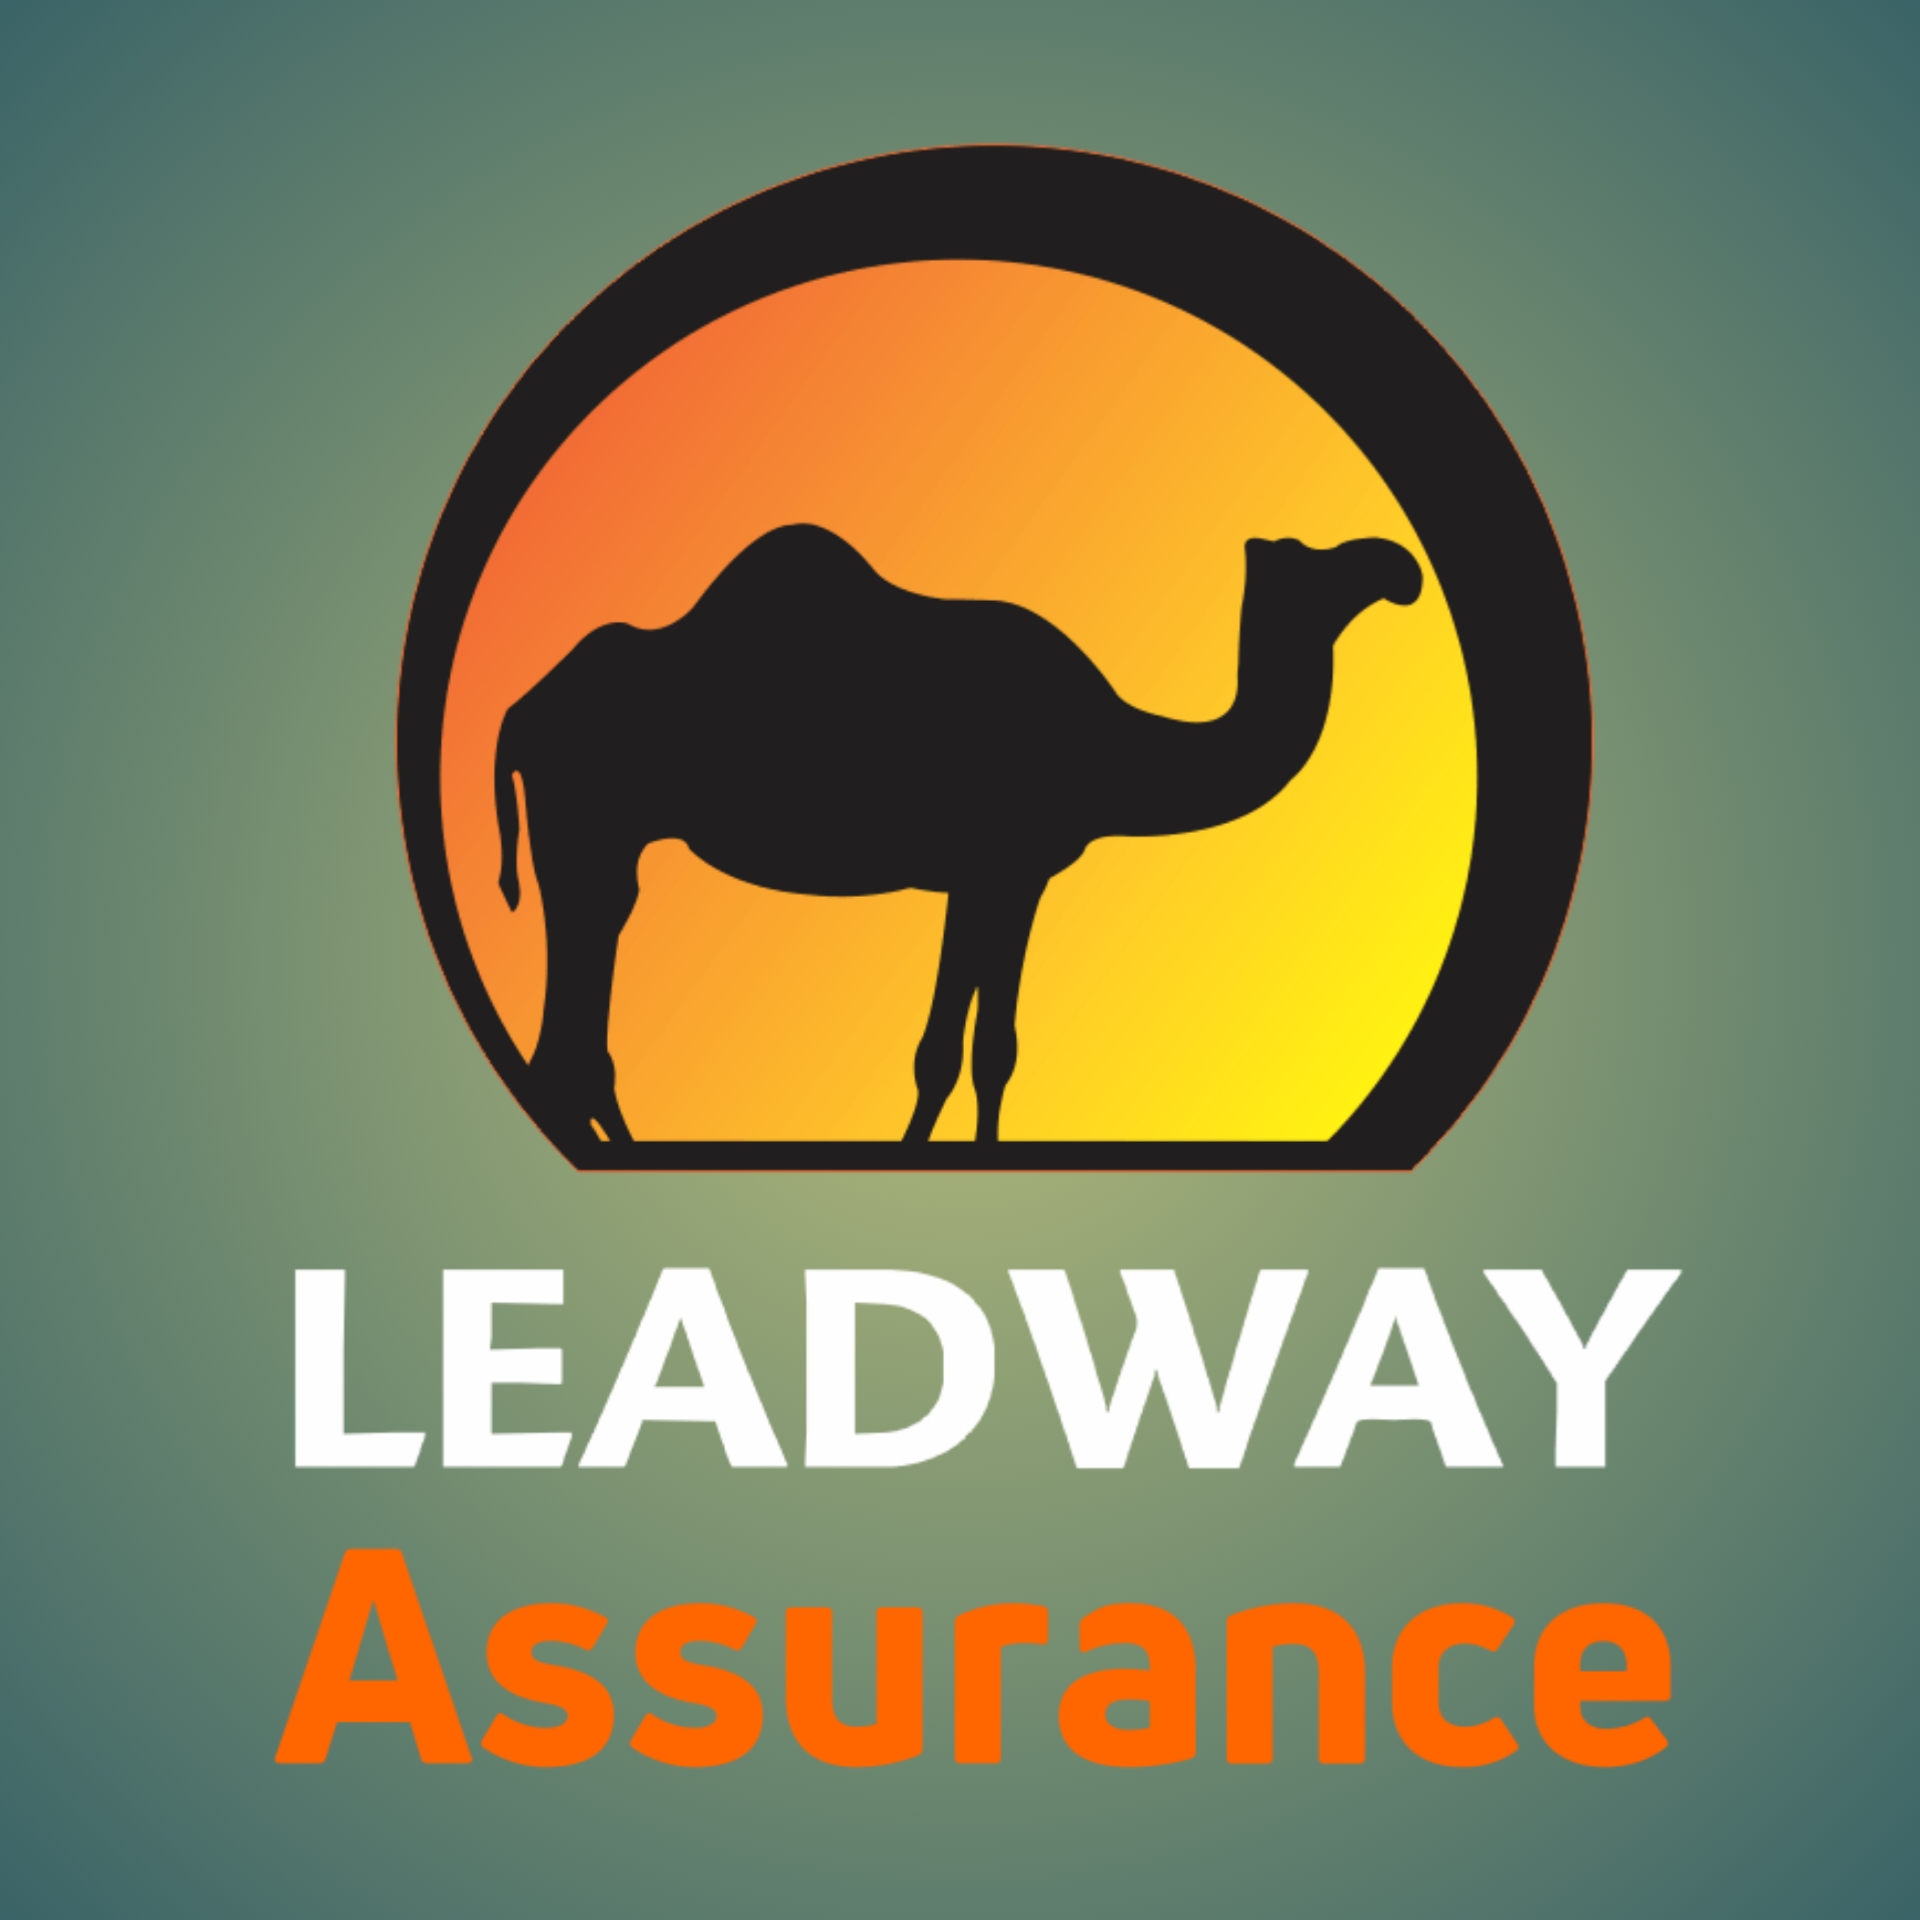 leadway-assurance-graduate-trainees-2022-how-to-apply-empowerment-opportunities